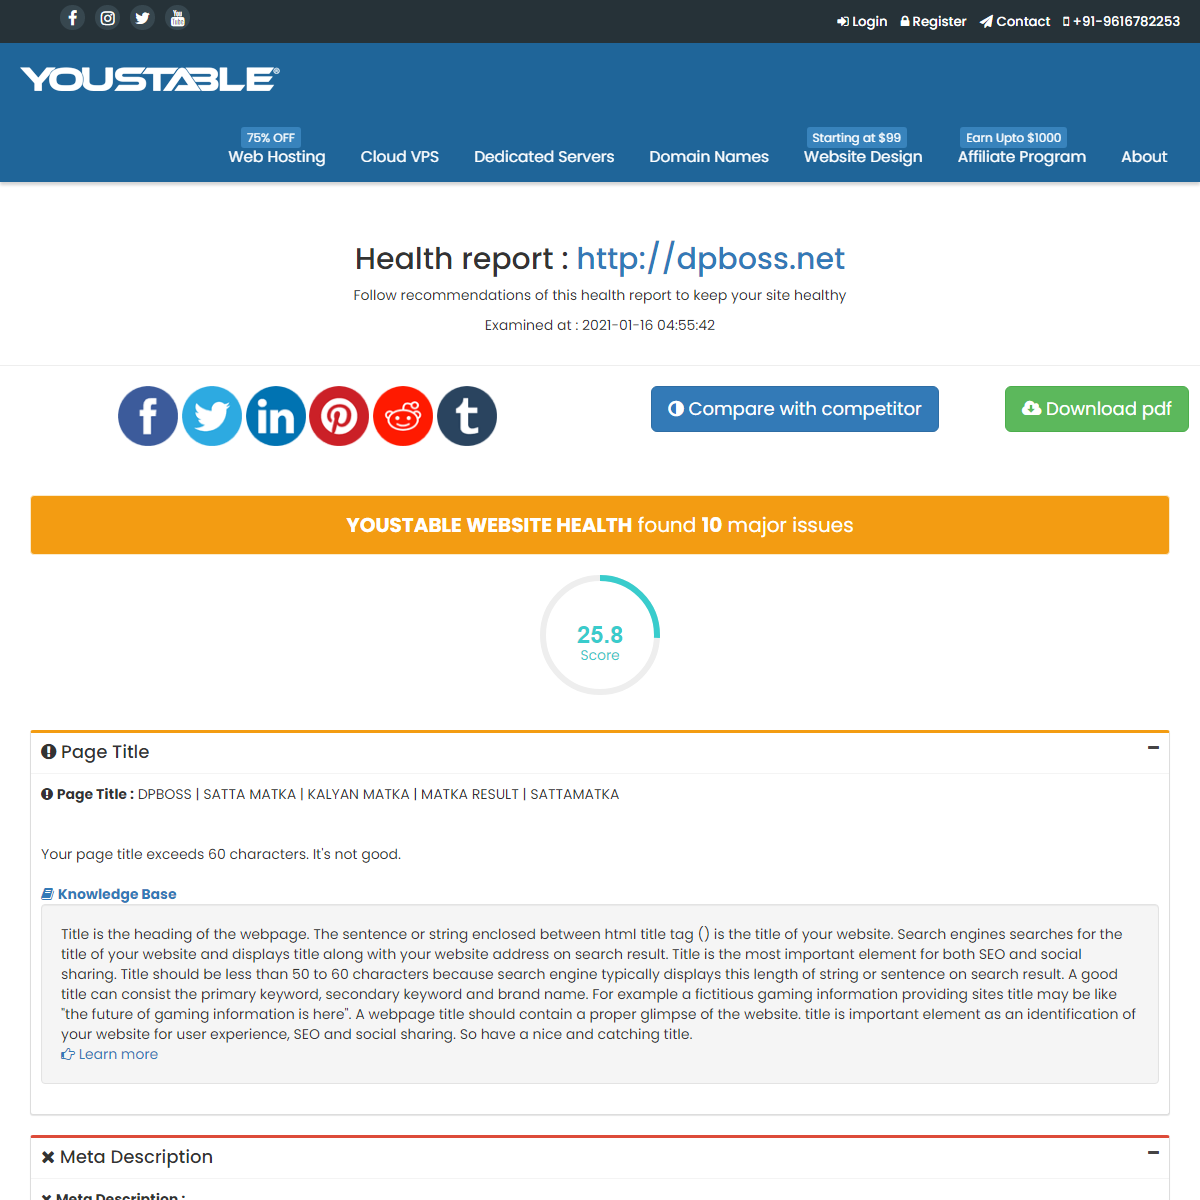 A complete backup of https://health.youstable.com/health_check/report/231/dpboss.net